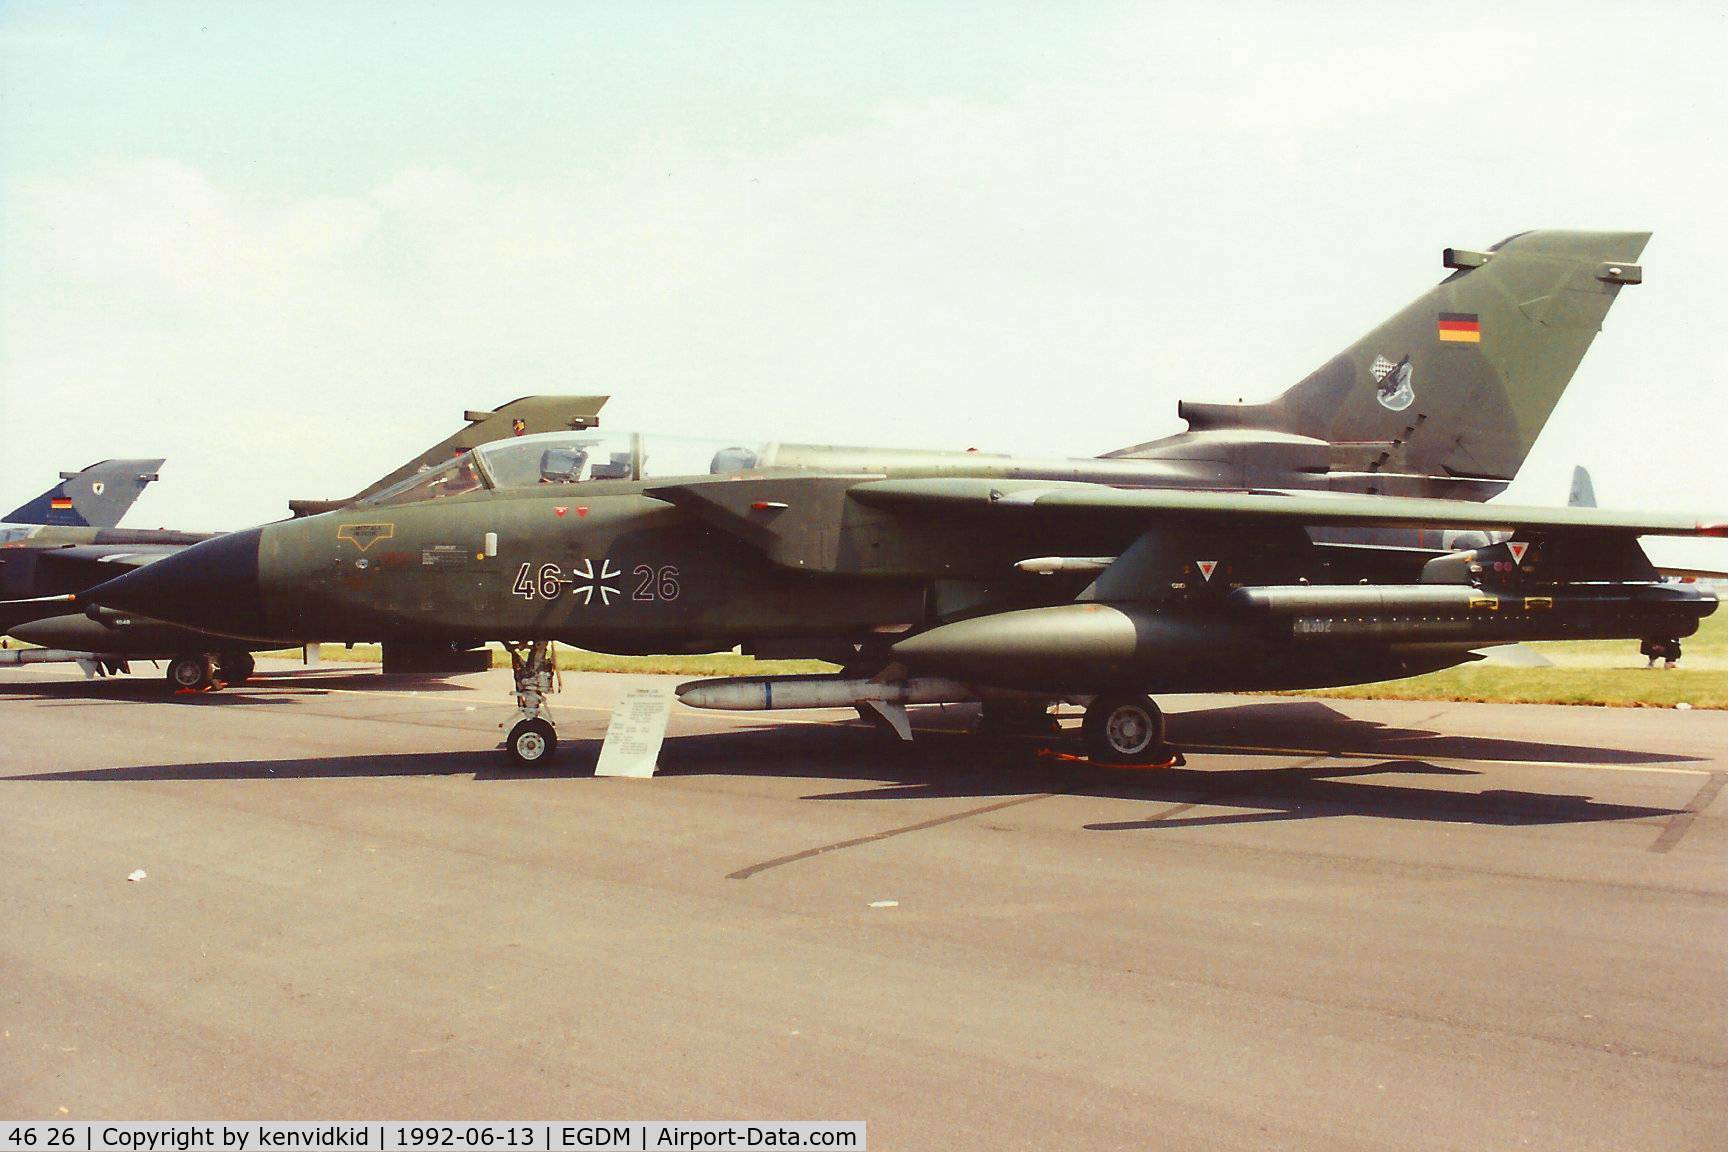 46 26, Panavia Tornado ECR C/N 823/GS259/4326, At Boscombe Down, scanned from print.